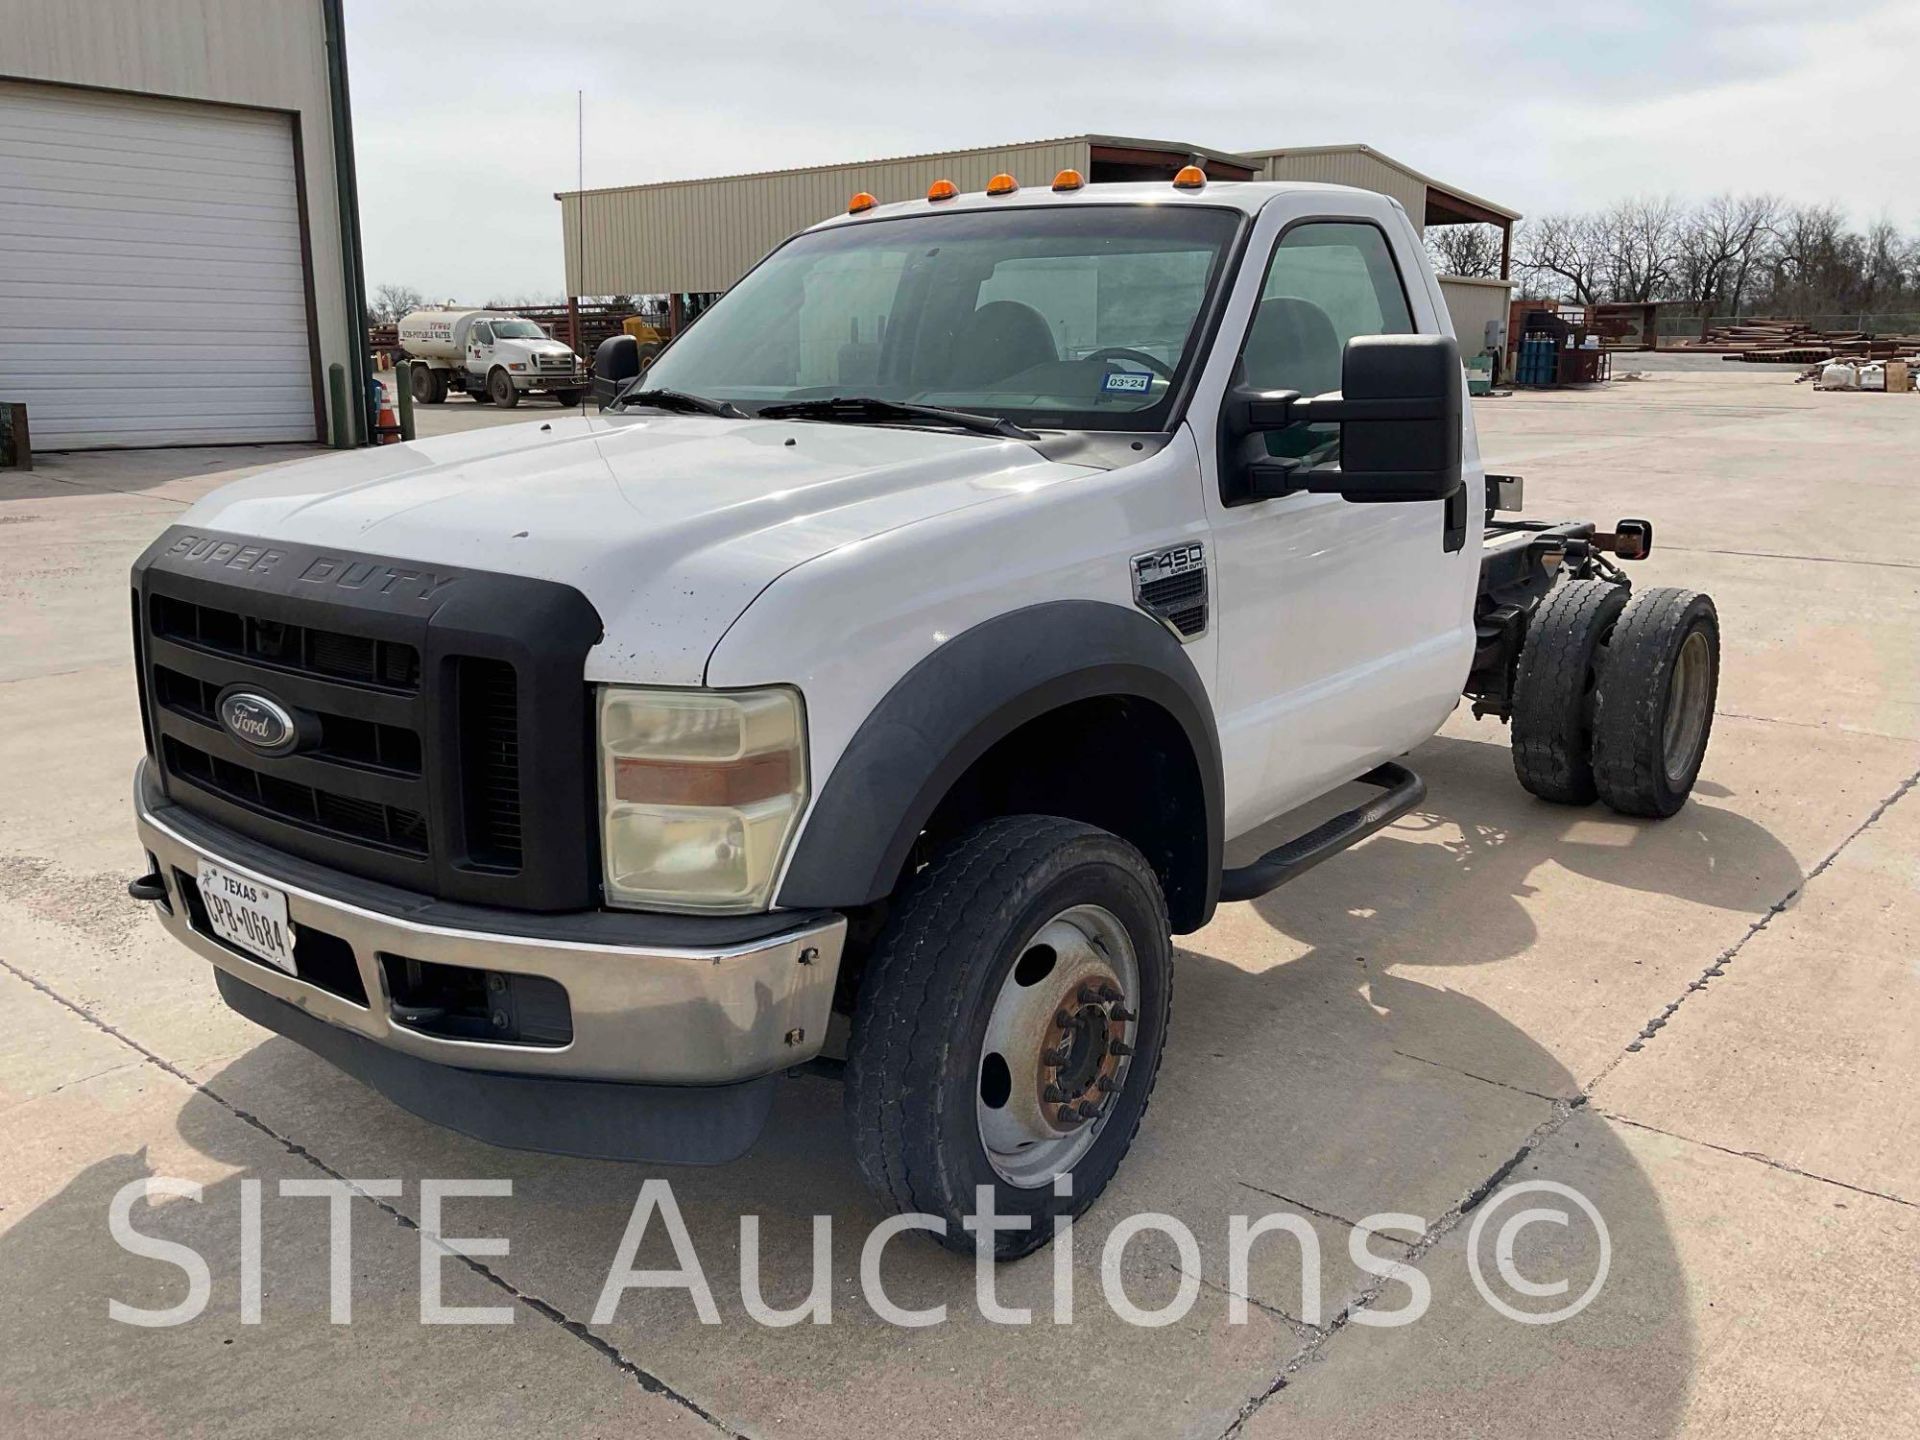 2010 Ford F450 SD Cab & Chassis Truck